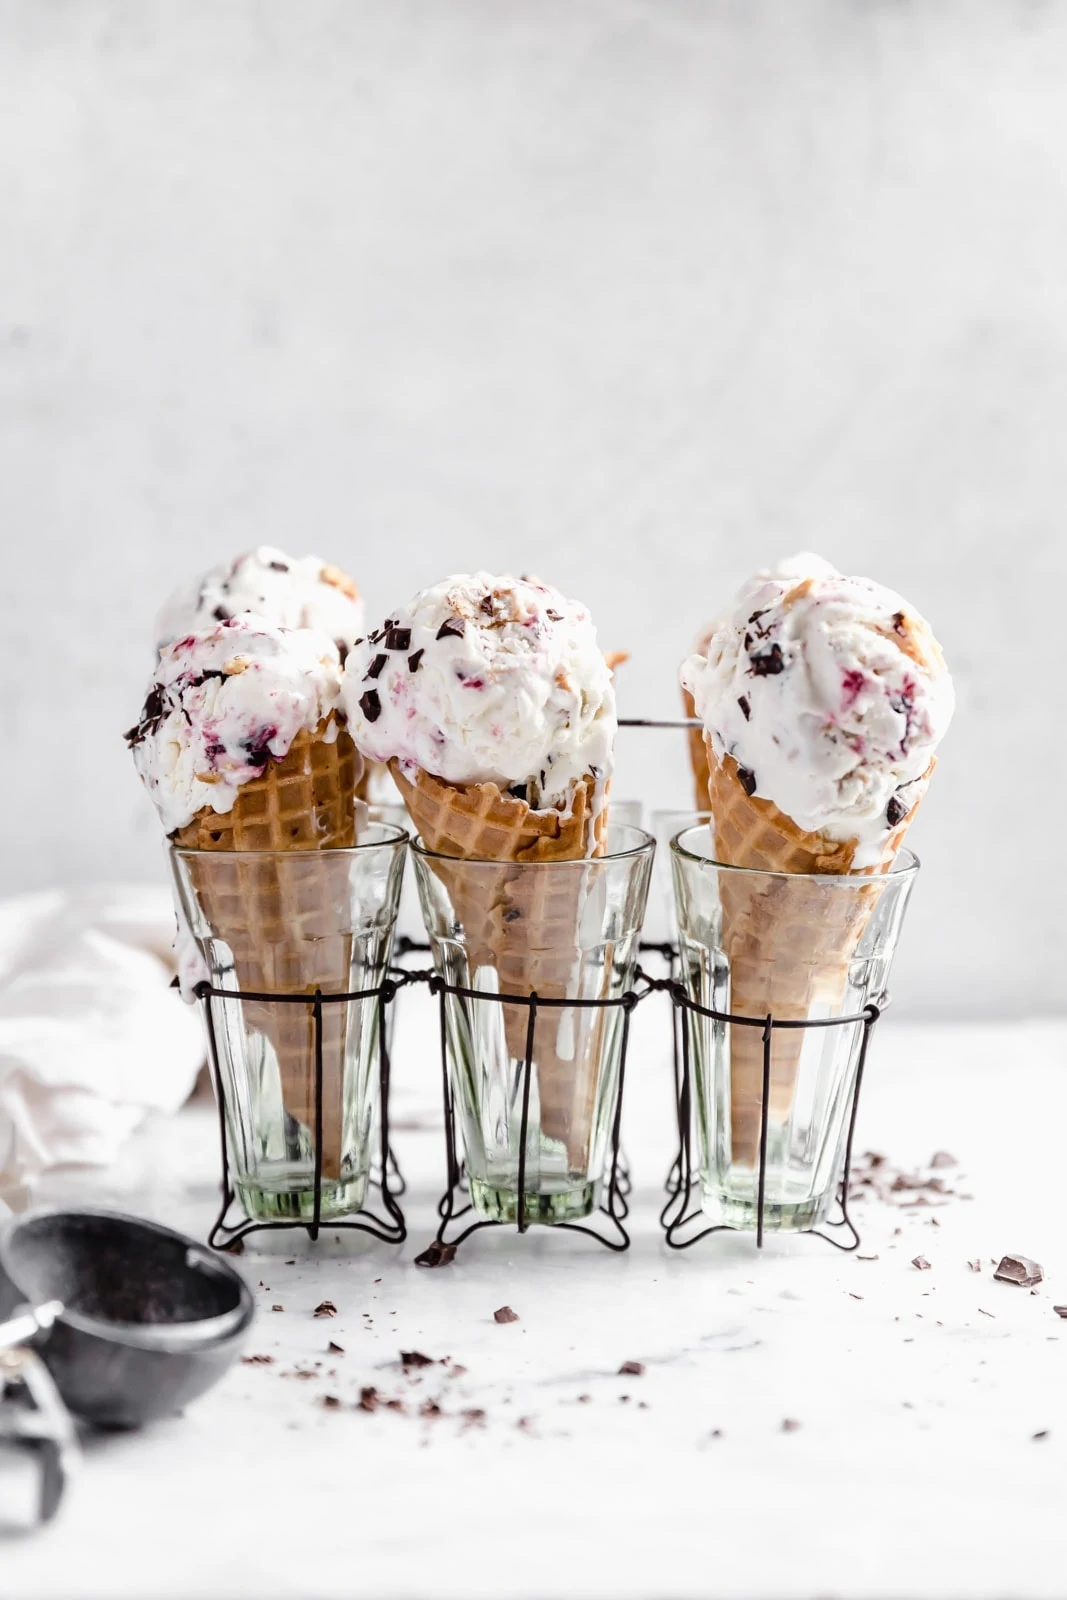 This creamy vanilla ice cream with fat blackberry swirls, buttery waffle pieces, and chocolate chips has us in heaven. Whip up this no churn blackberry waffle chocolate chip ice cream in minutes and skip the line at the ice cream shop.